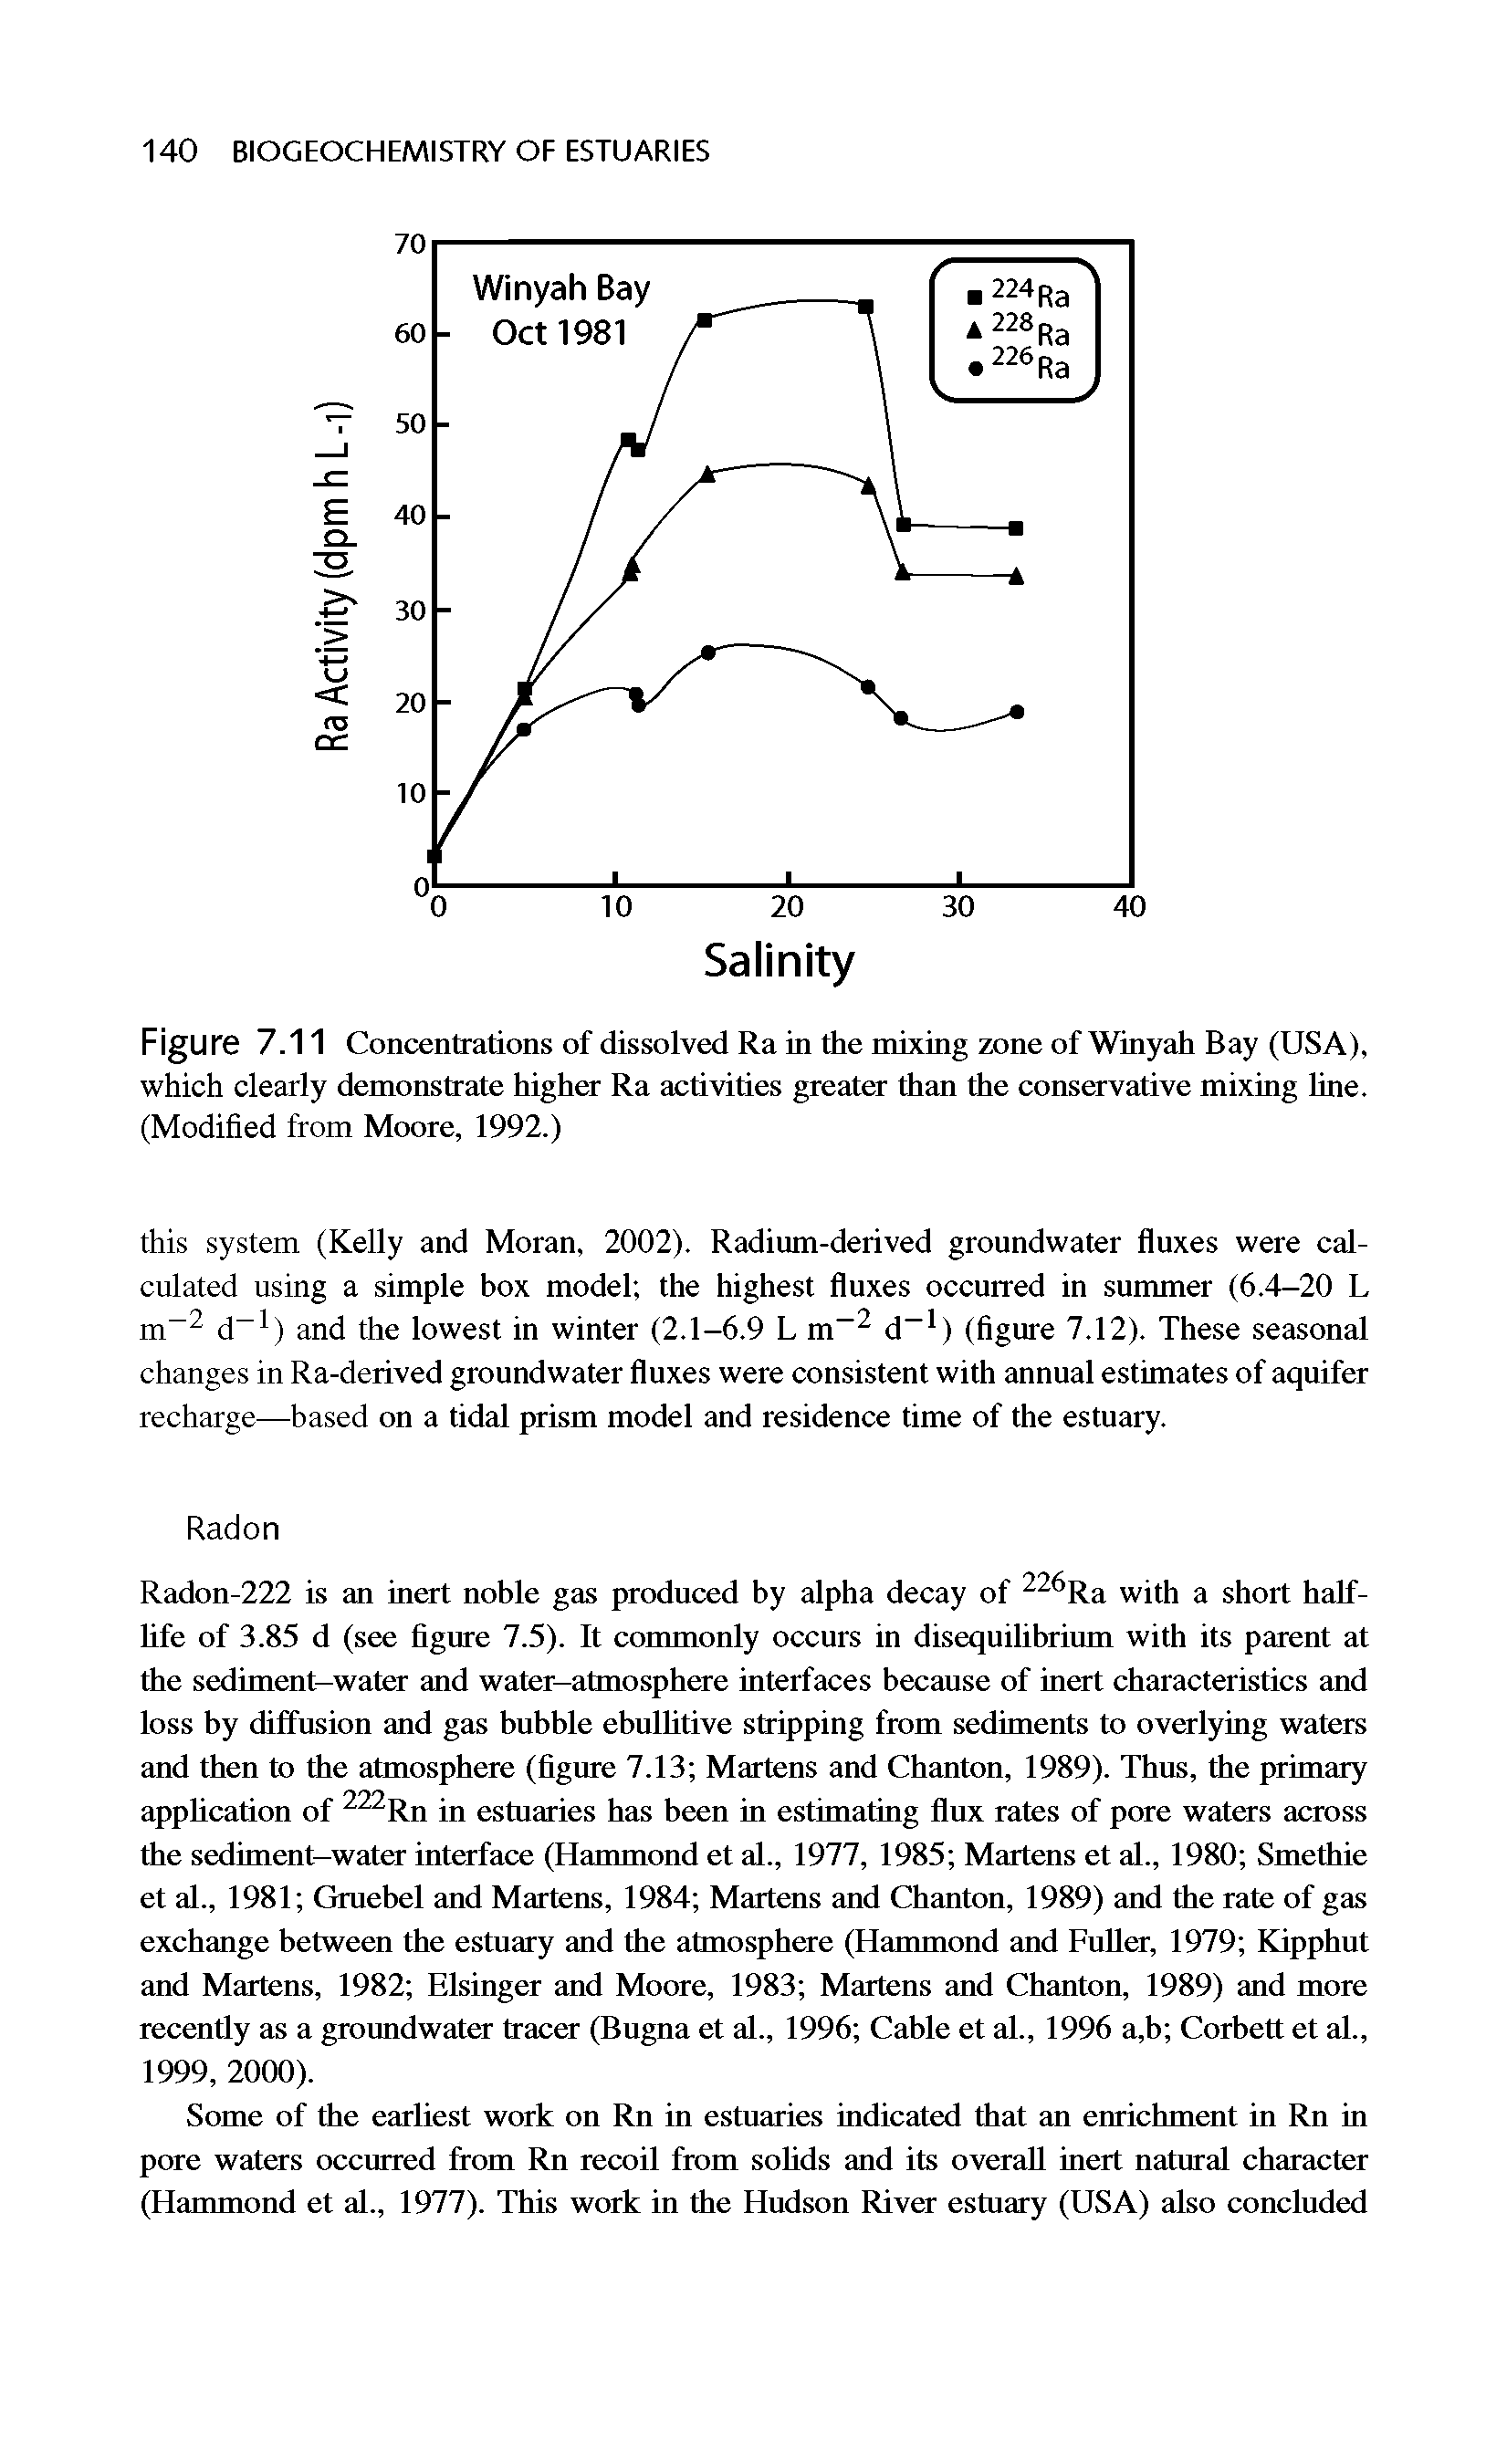 Figure 7.11 Concentrations of dissolved Ra in the mixing zone of Winyah Bay (USA), which clearly demonstrate higher Ra activities greater than the conservative mixing line. (Modified from Moore, 1992.)...